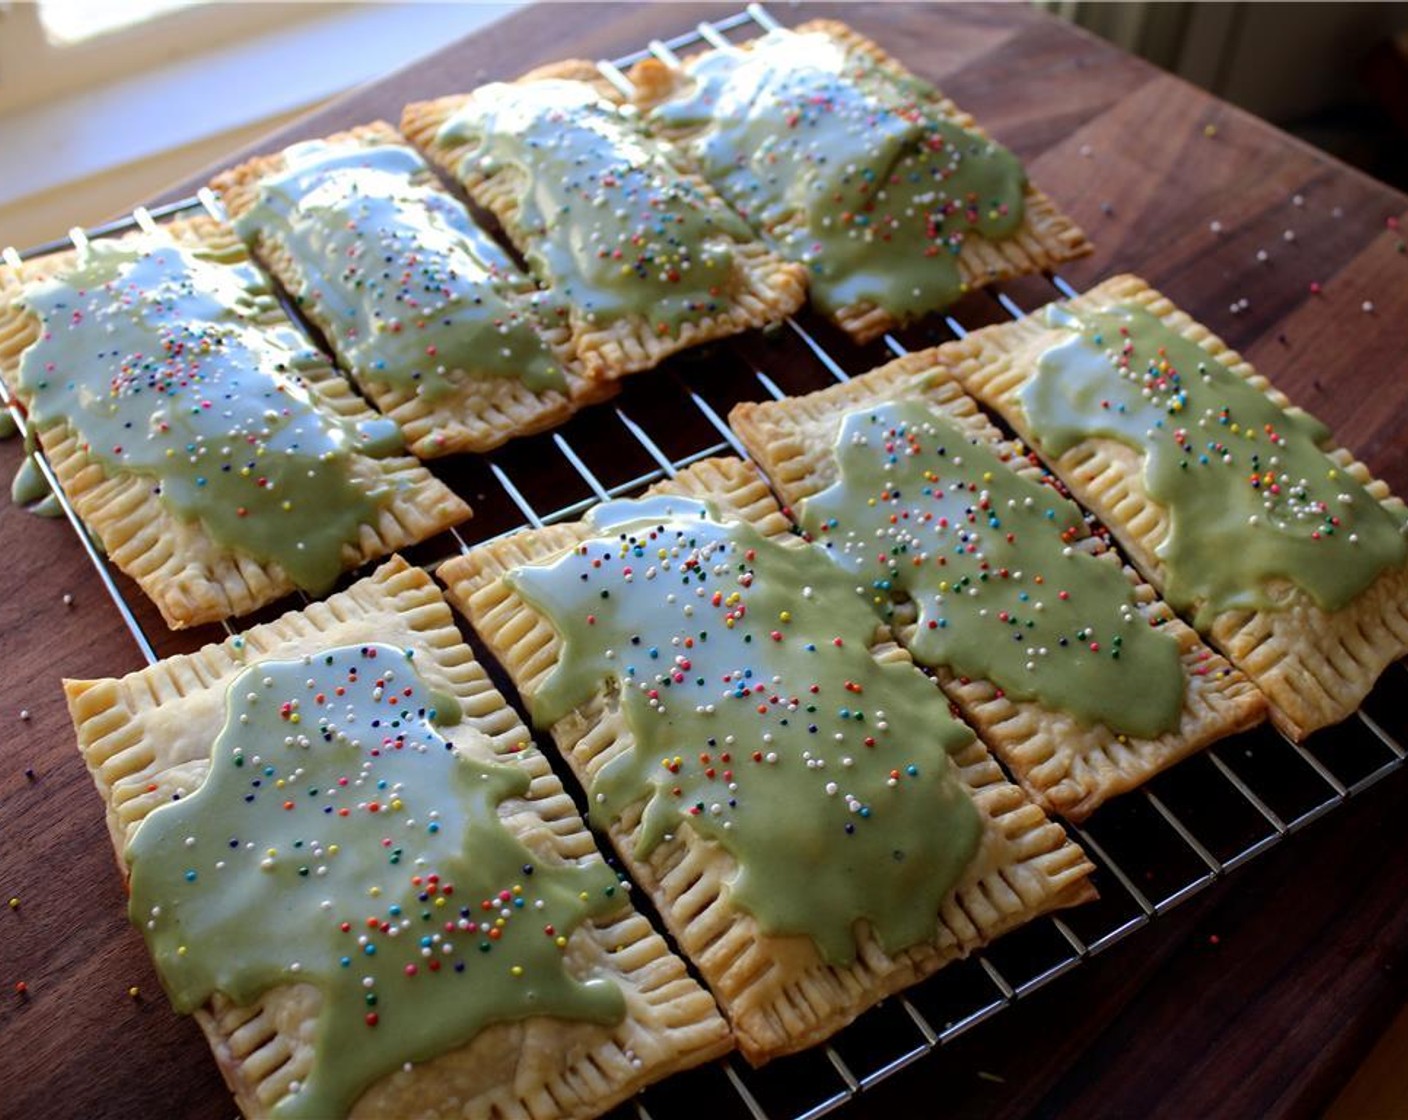 step 10 When the pop tarts are cool, spoon the glaze over the tops and immediately cover them in Sprinkles (to taste). Let the glaze set for a few minutes, and then serve immediately or store at room temperature in an airtight container.